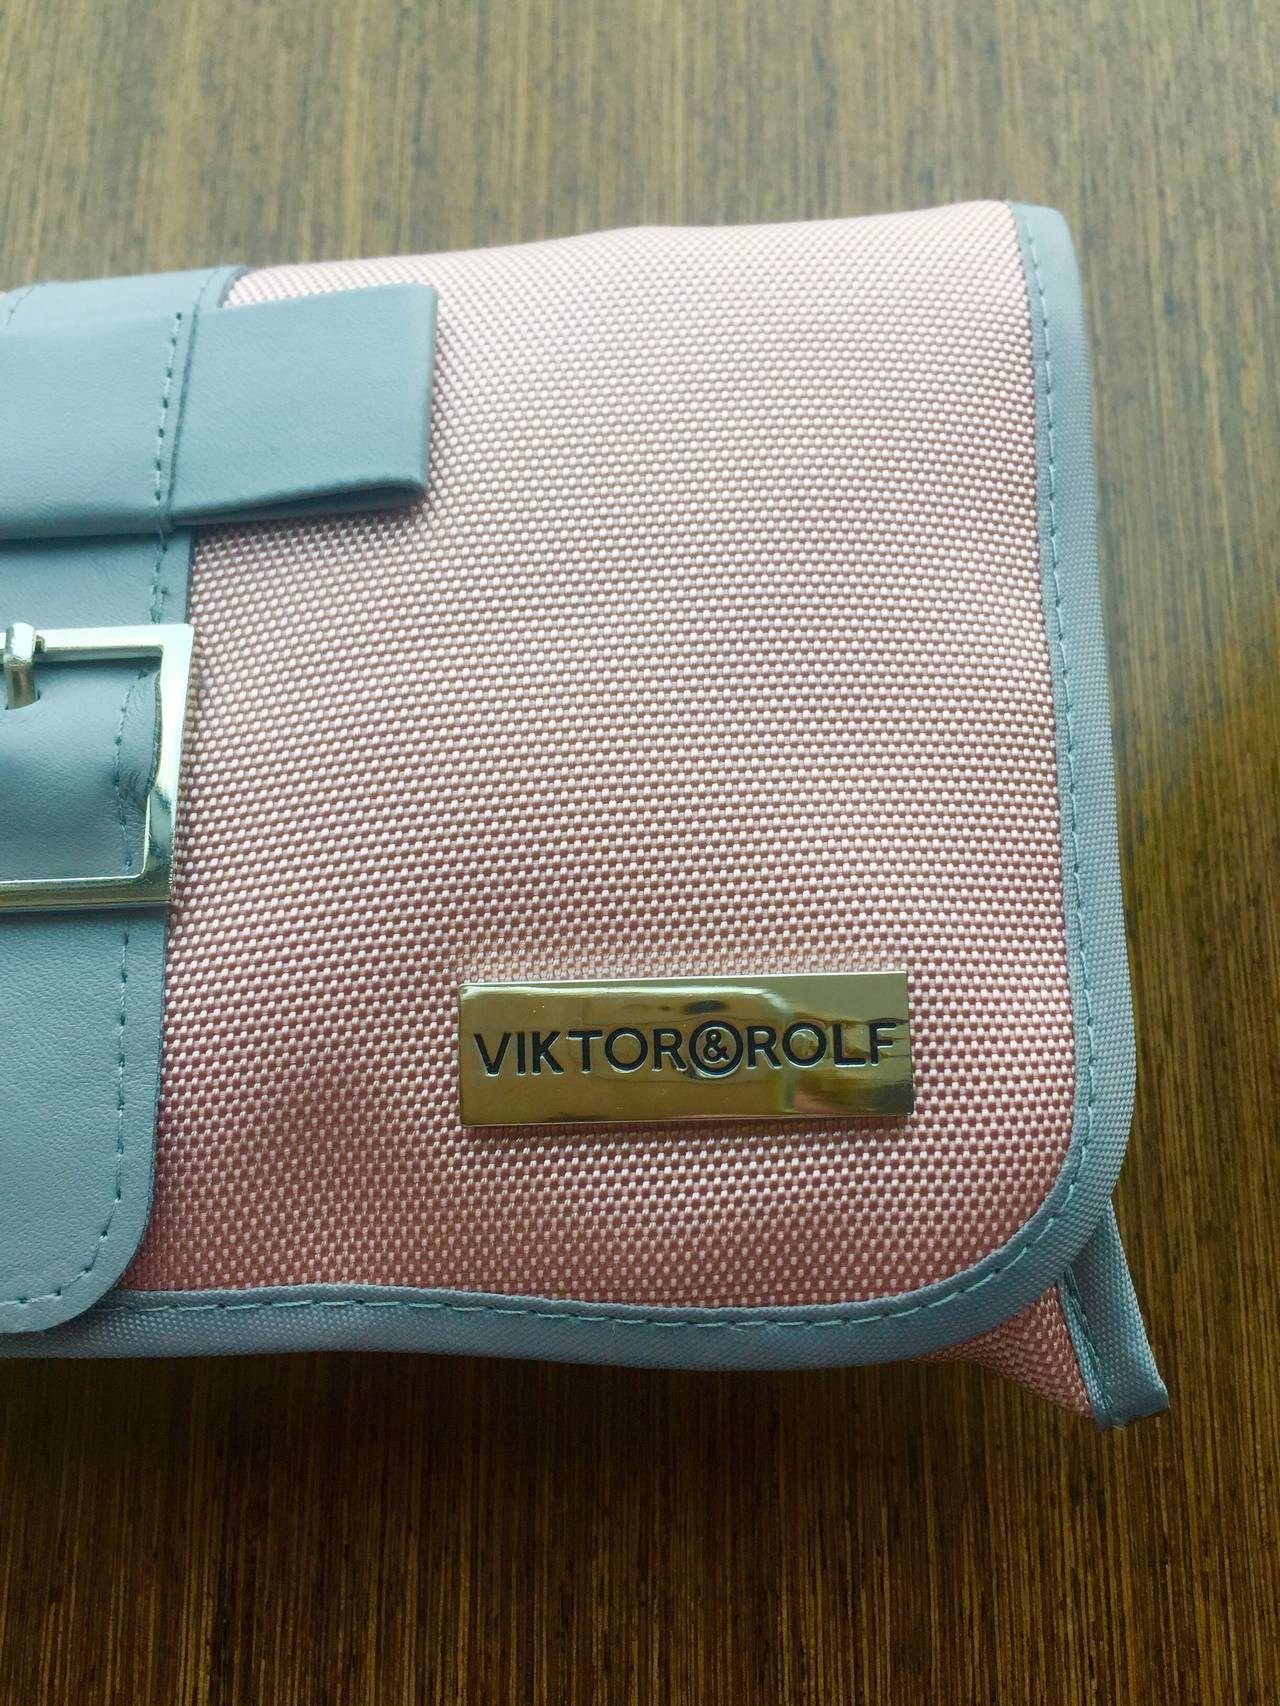 Women's Viktor & Rolf Limited Edition KLM Pink Bow Wristlet Clutch Purse For Sale